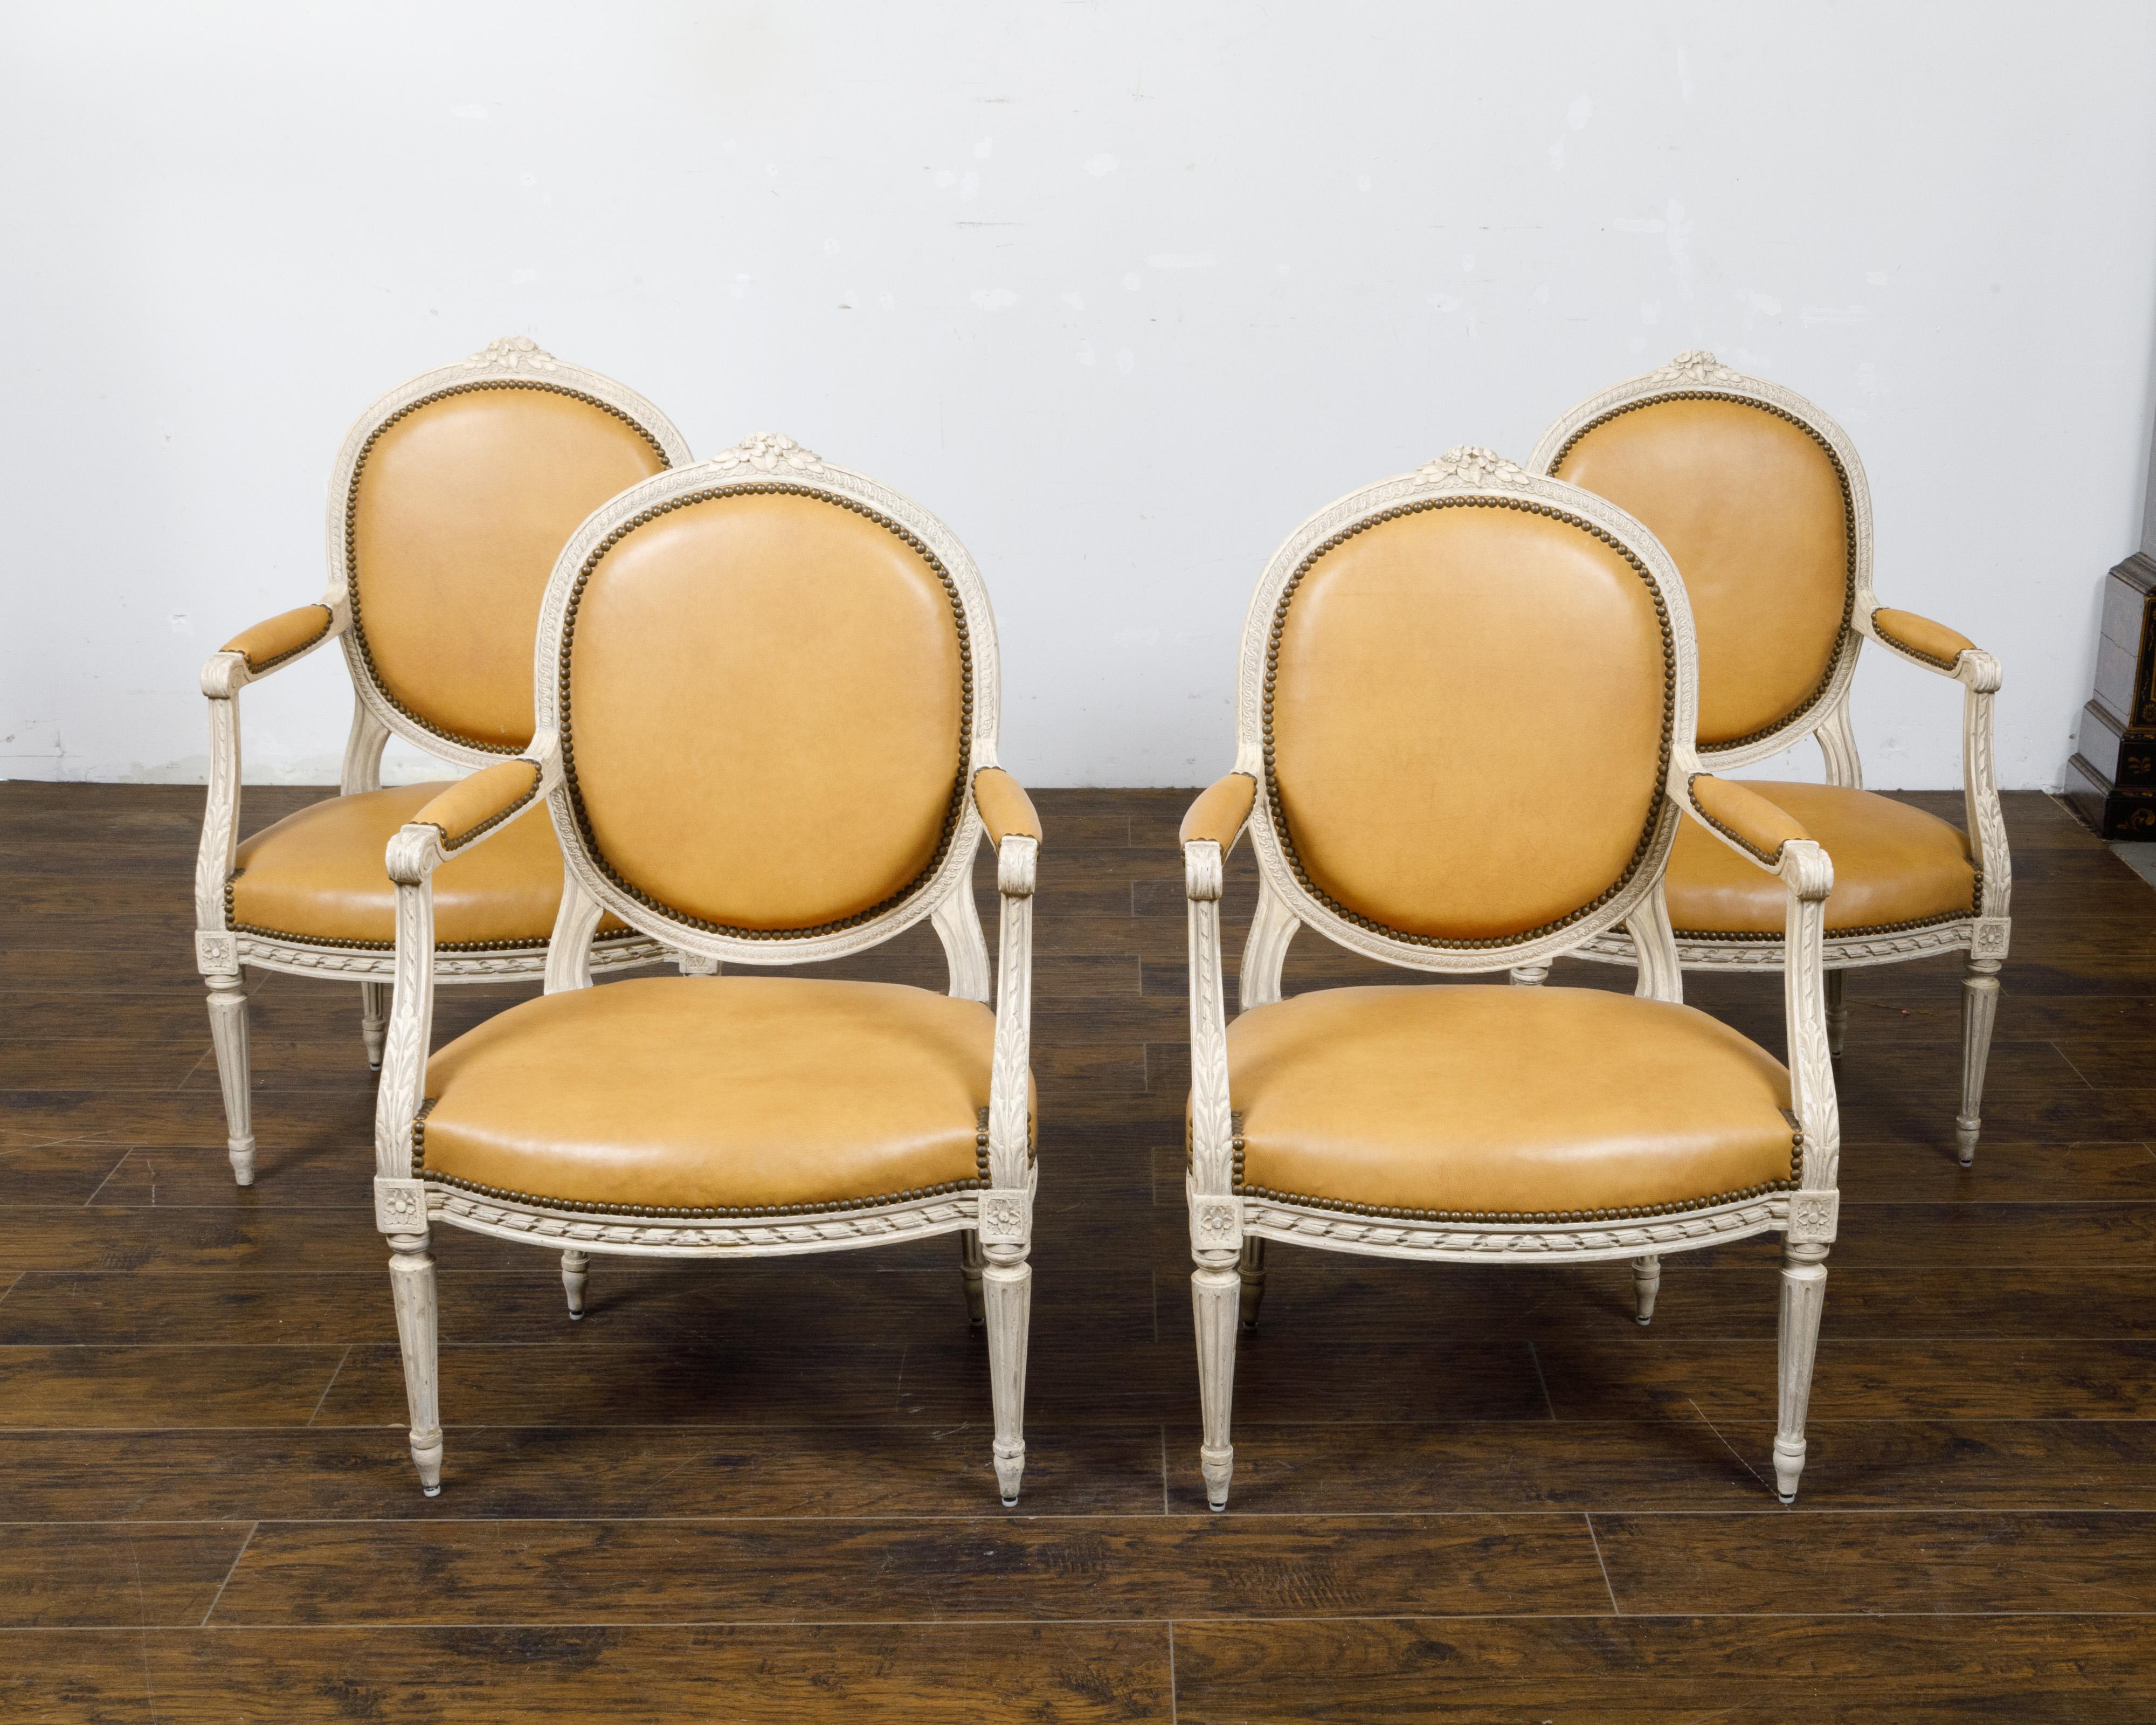 A set of four French Louis XVI style off-white painted oval back armchairs from circa 1900 with carved décor. This set of four French Louis XVI style armchairs, dating back to circa 1900, features an elegant off-white painted finish with traces of